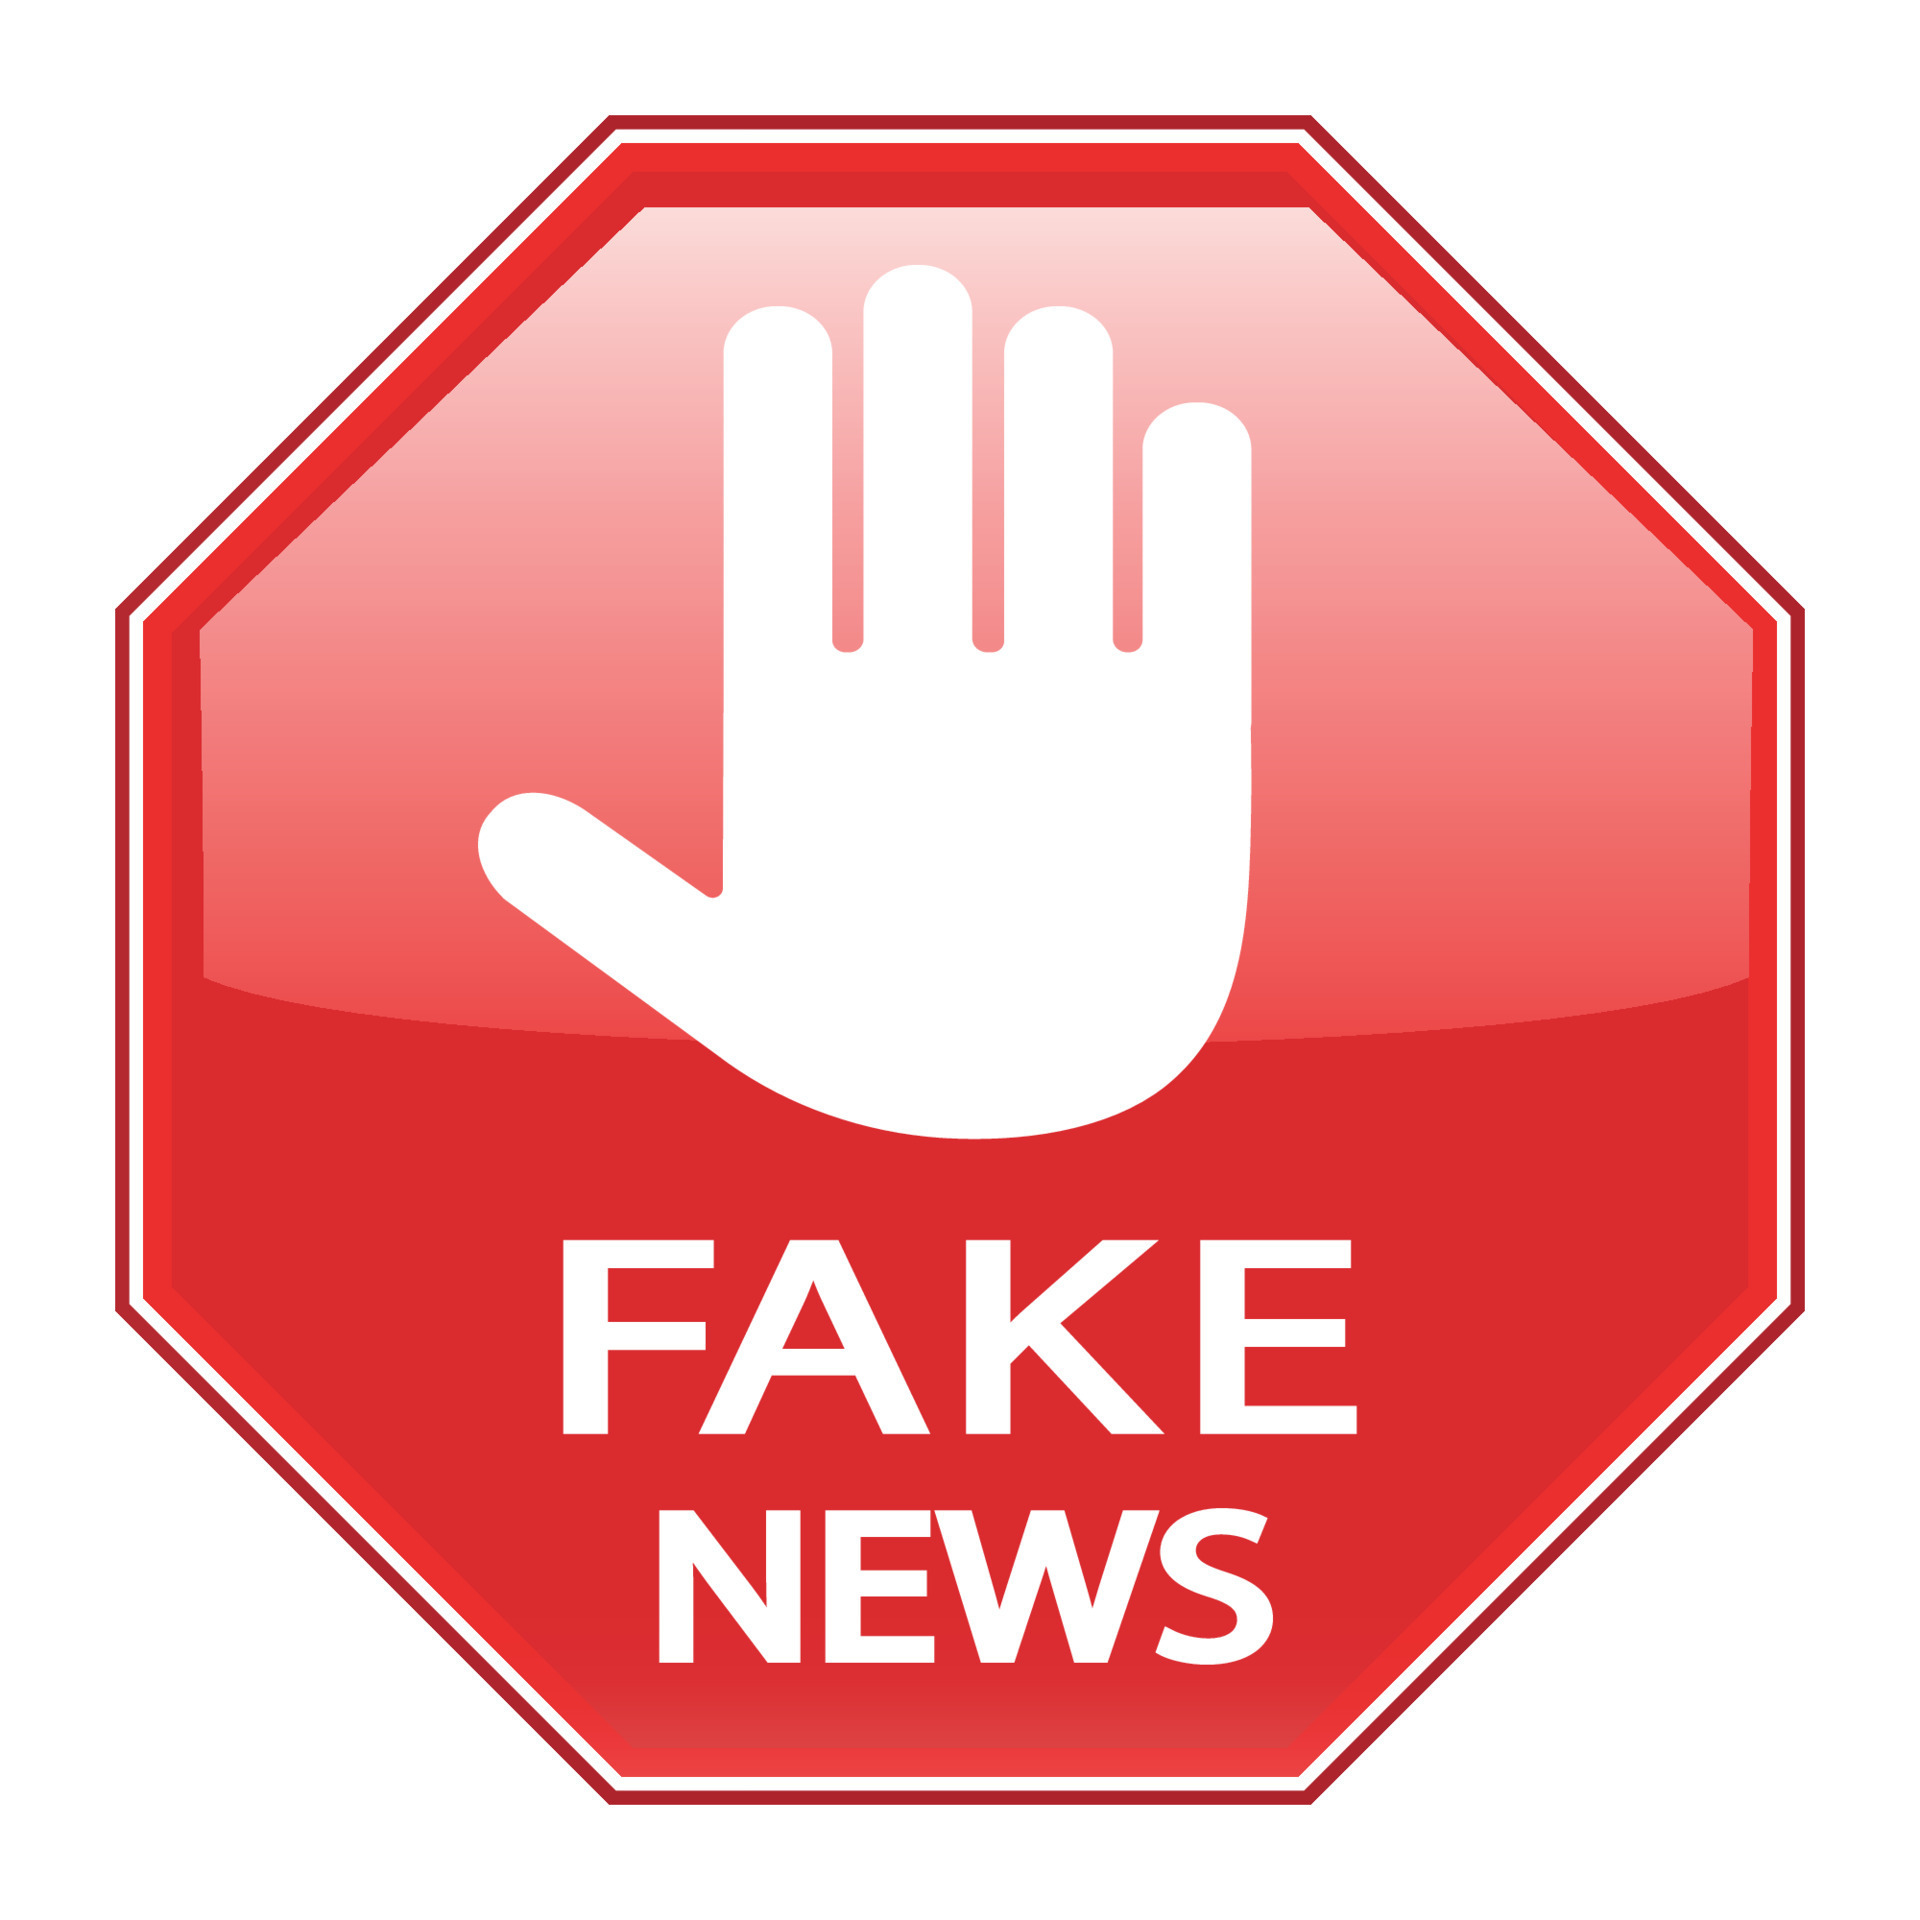 Stop Fake News and disinformation in the media sign 7504969 Vector Art ...